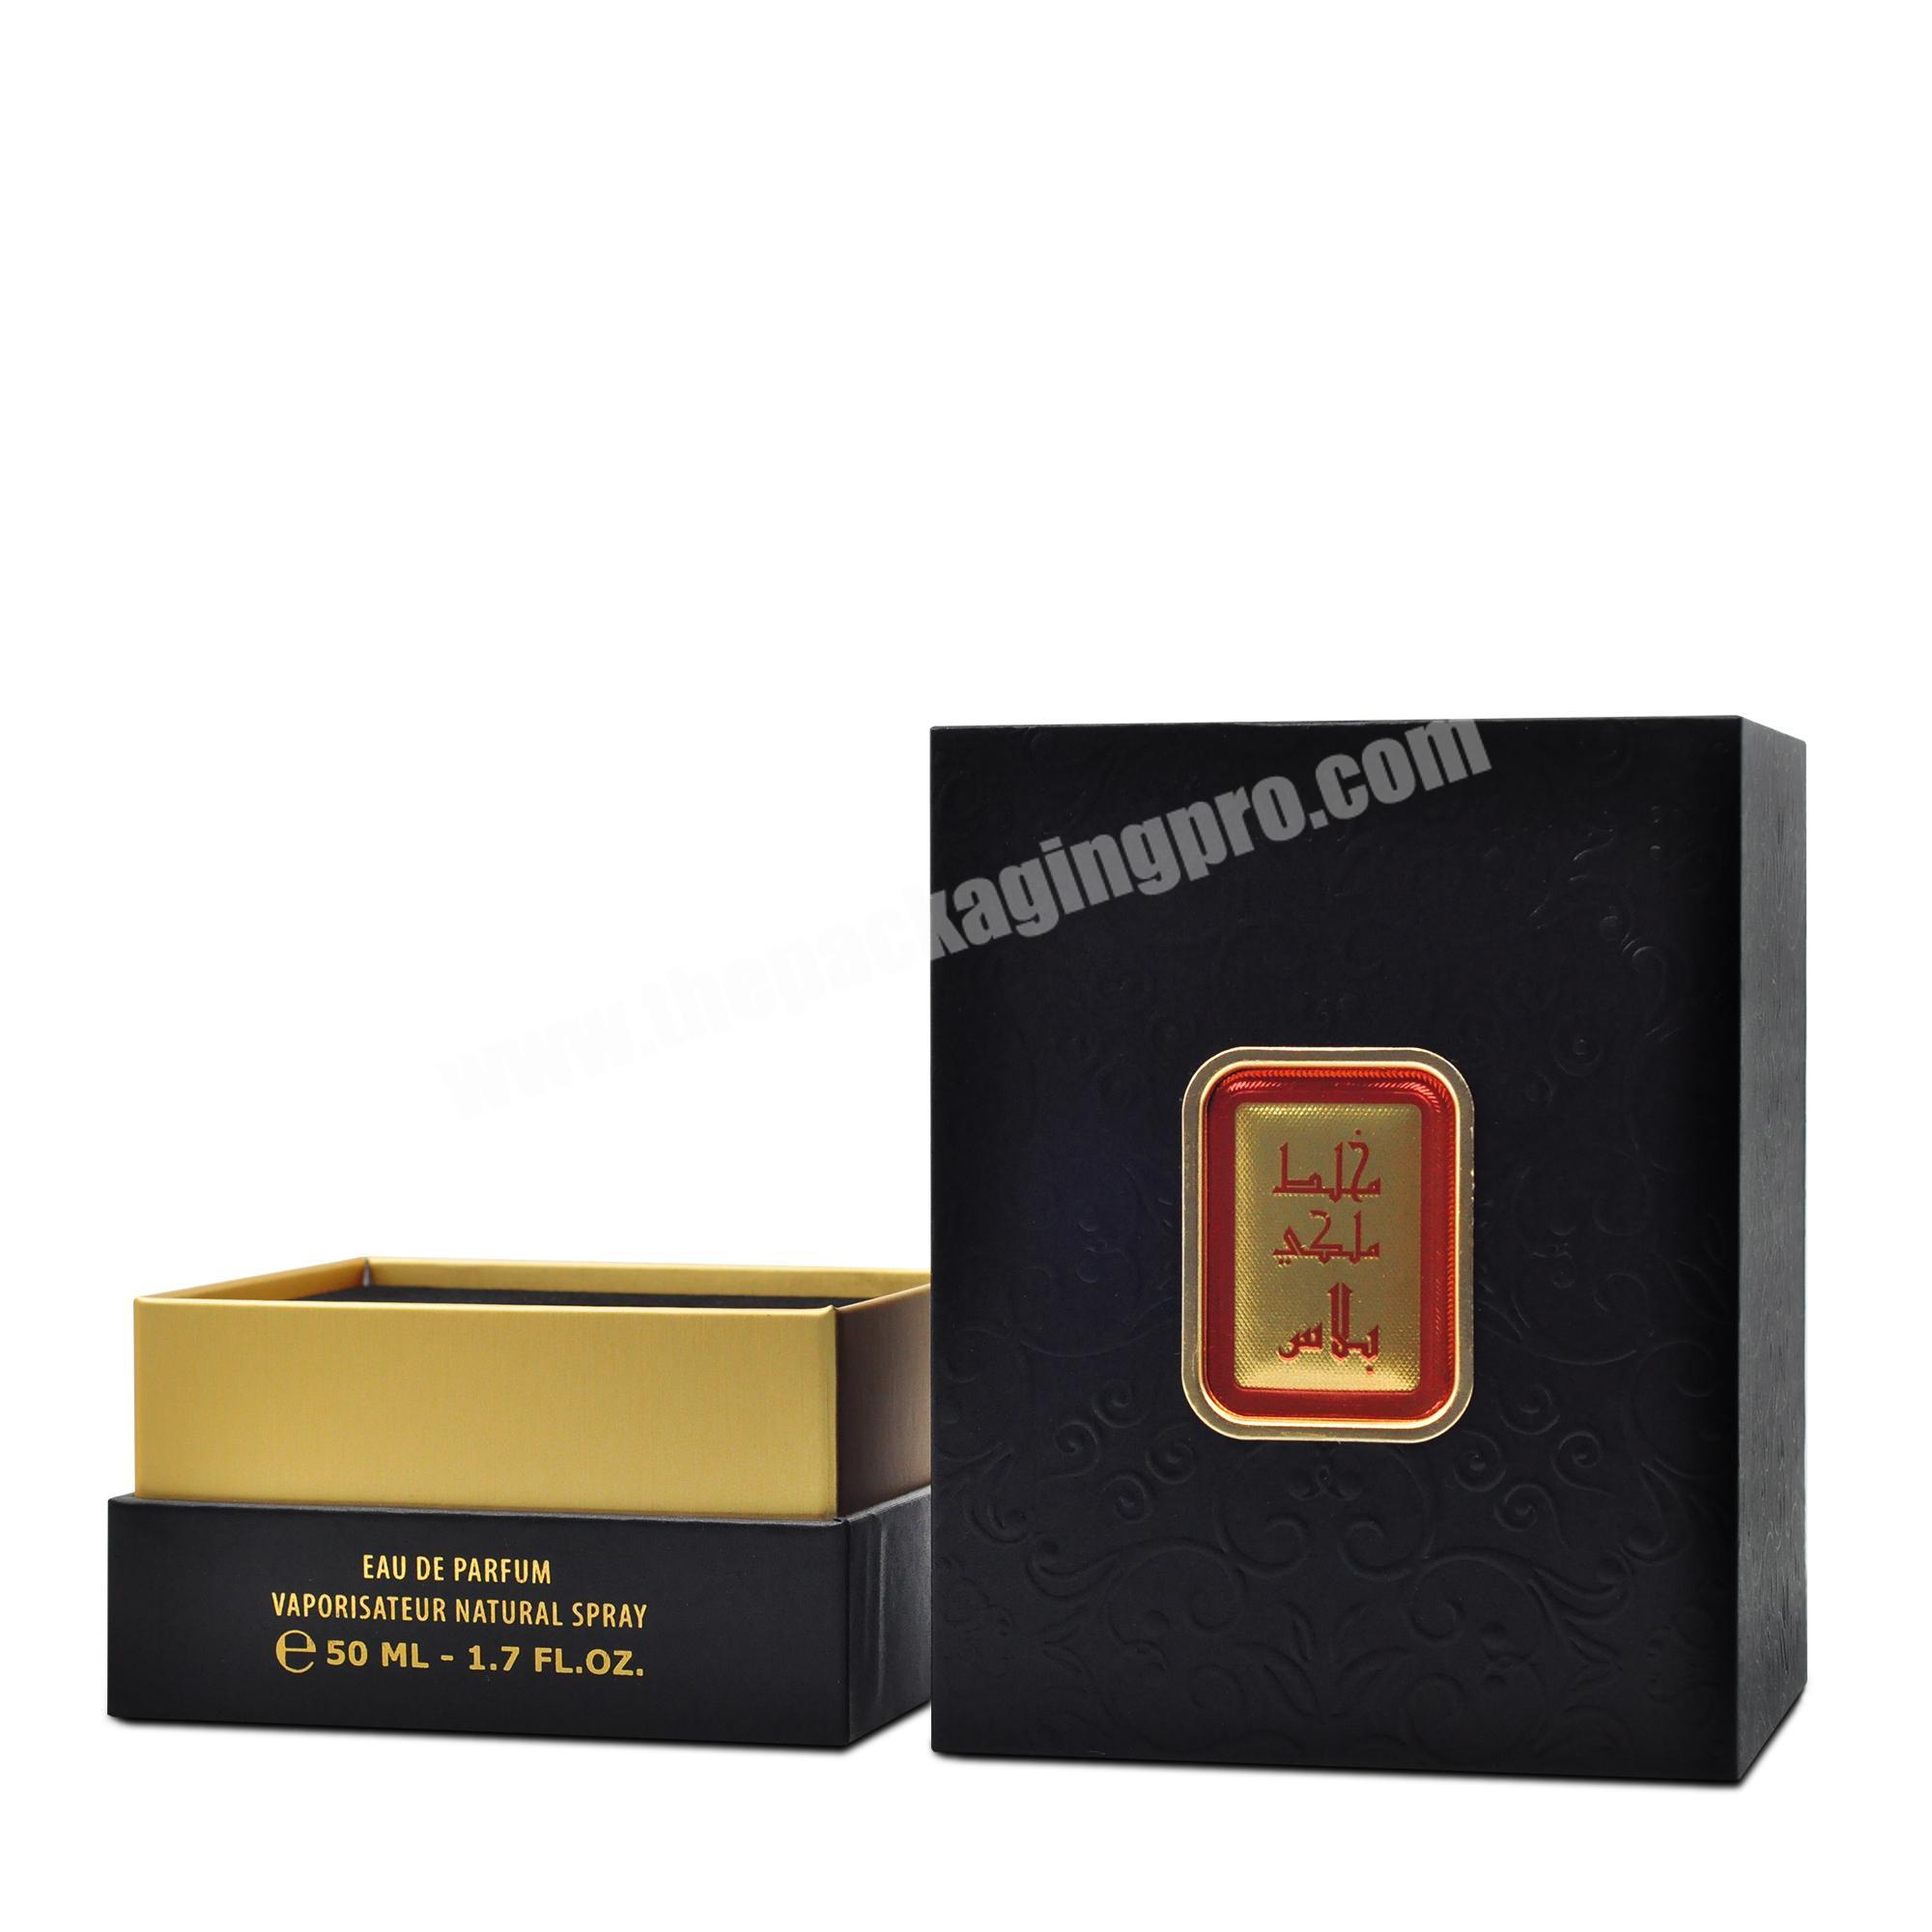 Custom Luxury Embroidery Words Box Dropper Bottle Box Black Golden Perfume Packing Box Beauty Packaging Art Paper Customized